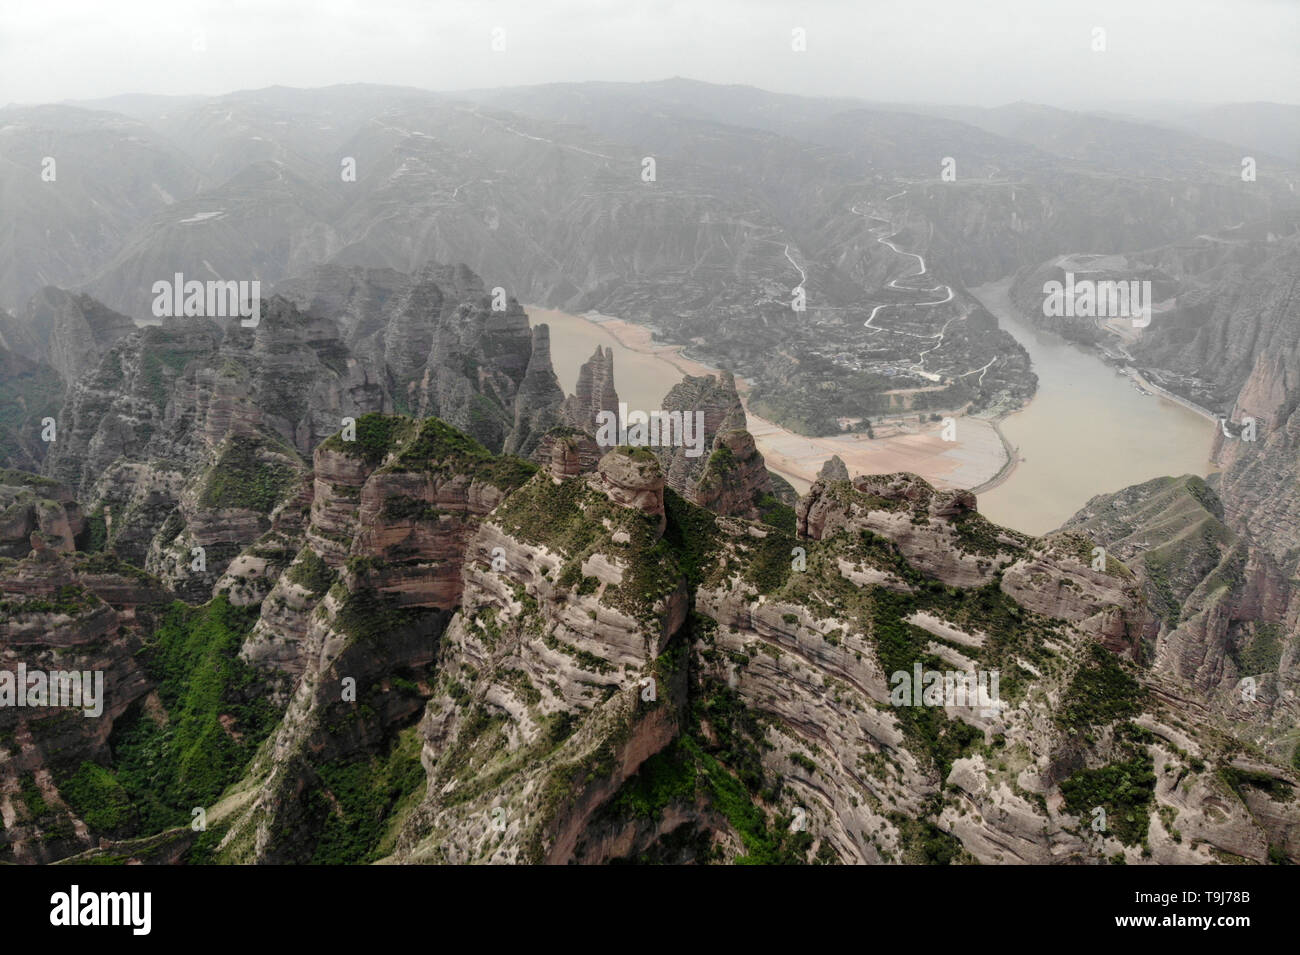 Yongjing. 19th May, 2019. Aerial photo taken on May 19, 2019 shows a stone forest at Bingling Danxia National Geological Park in Yongjing County, northwest China's Gansu Province. Danxia landform is a unique type of landscapes formed from red sandstone and characterized by steep cliffs. Credit: Fan Peishen/Xinhua/Alamy Live News Stock Photo